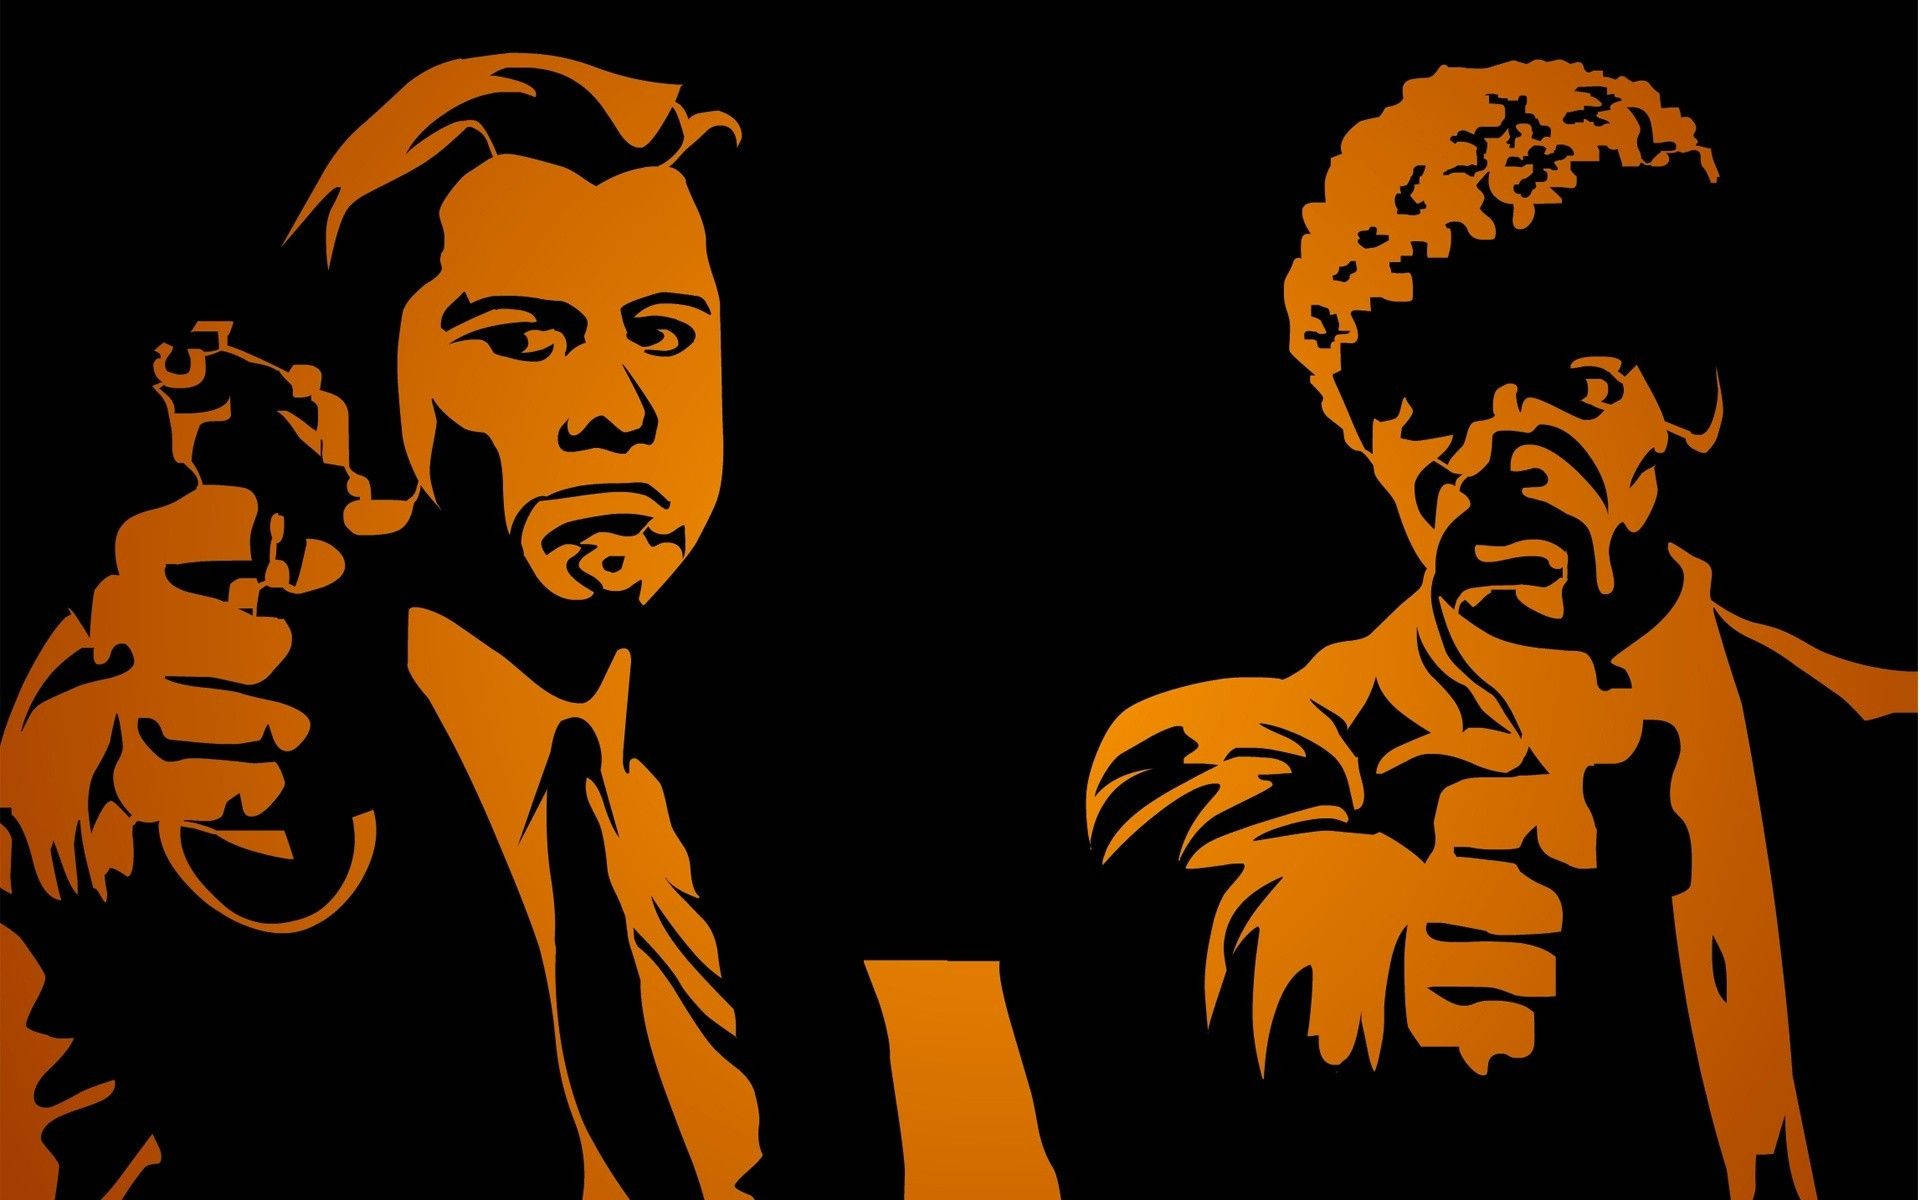 Iconic Scene From Pulp Fiction Featuring Jules Winnfield And Vincent Vega